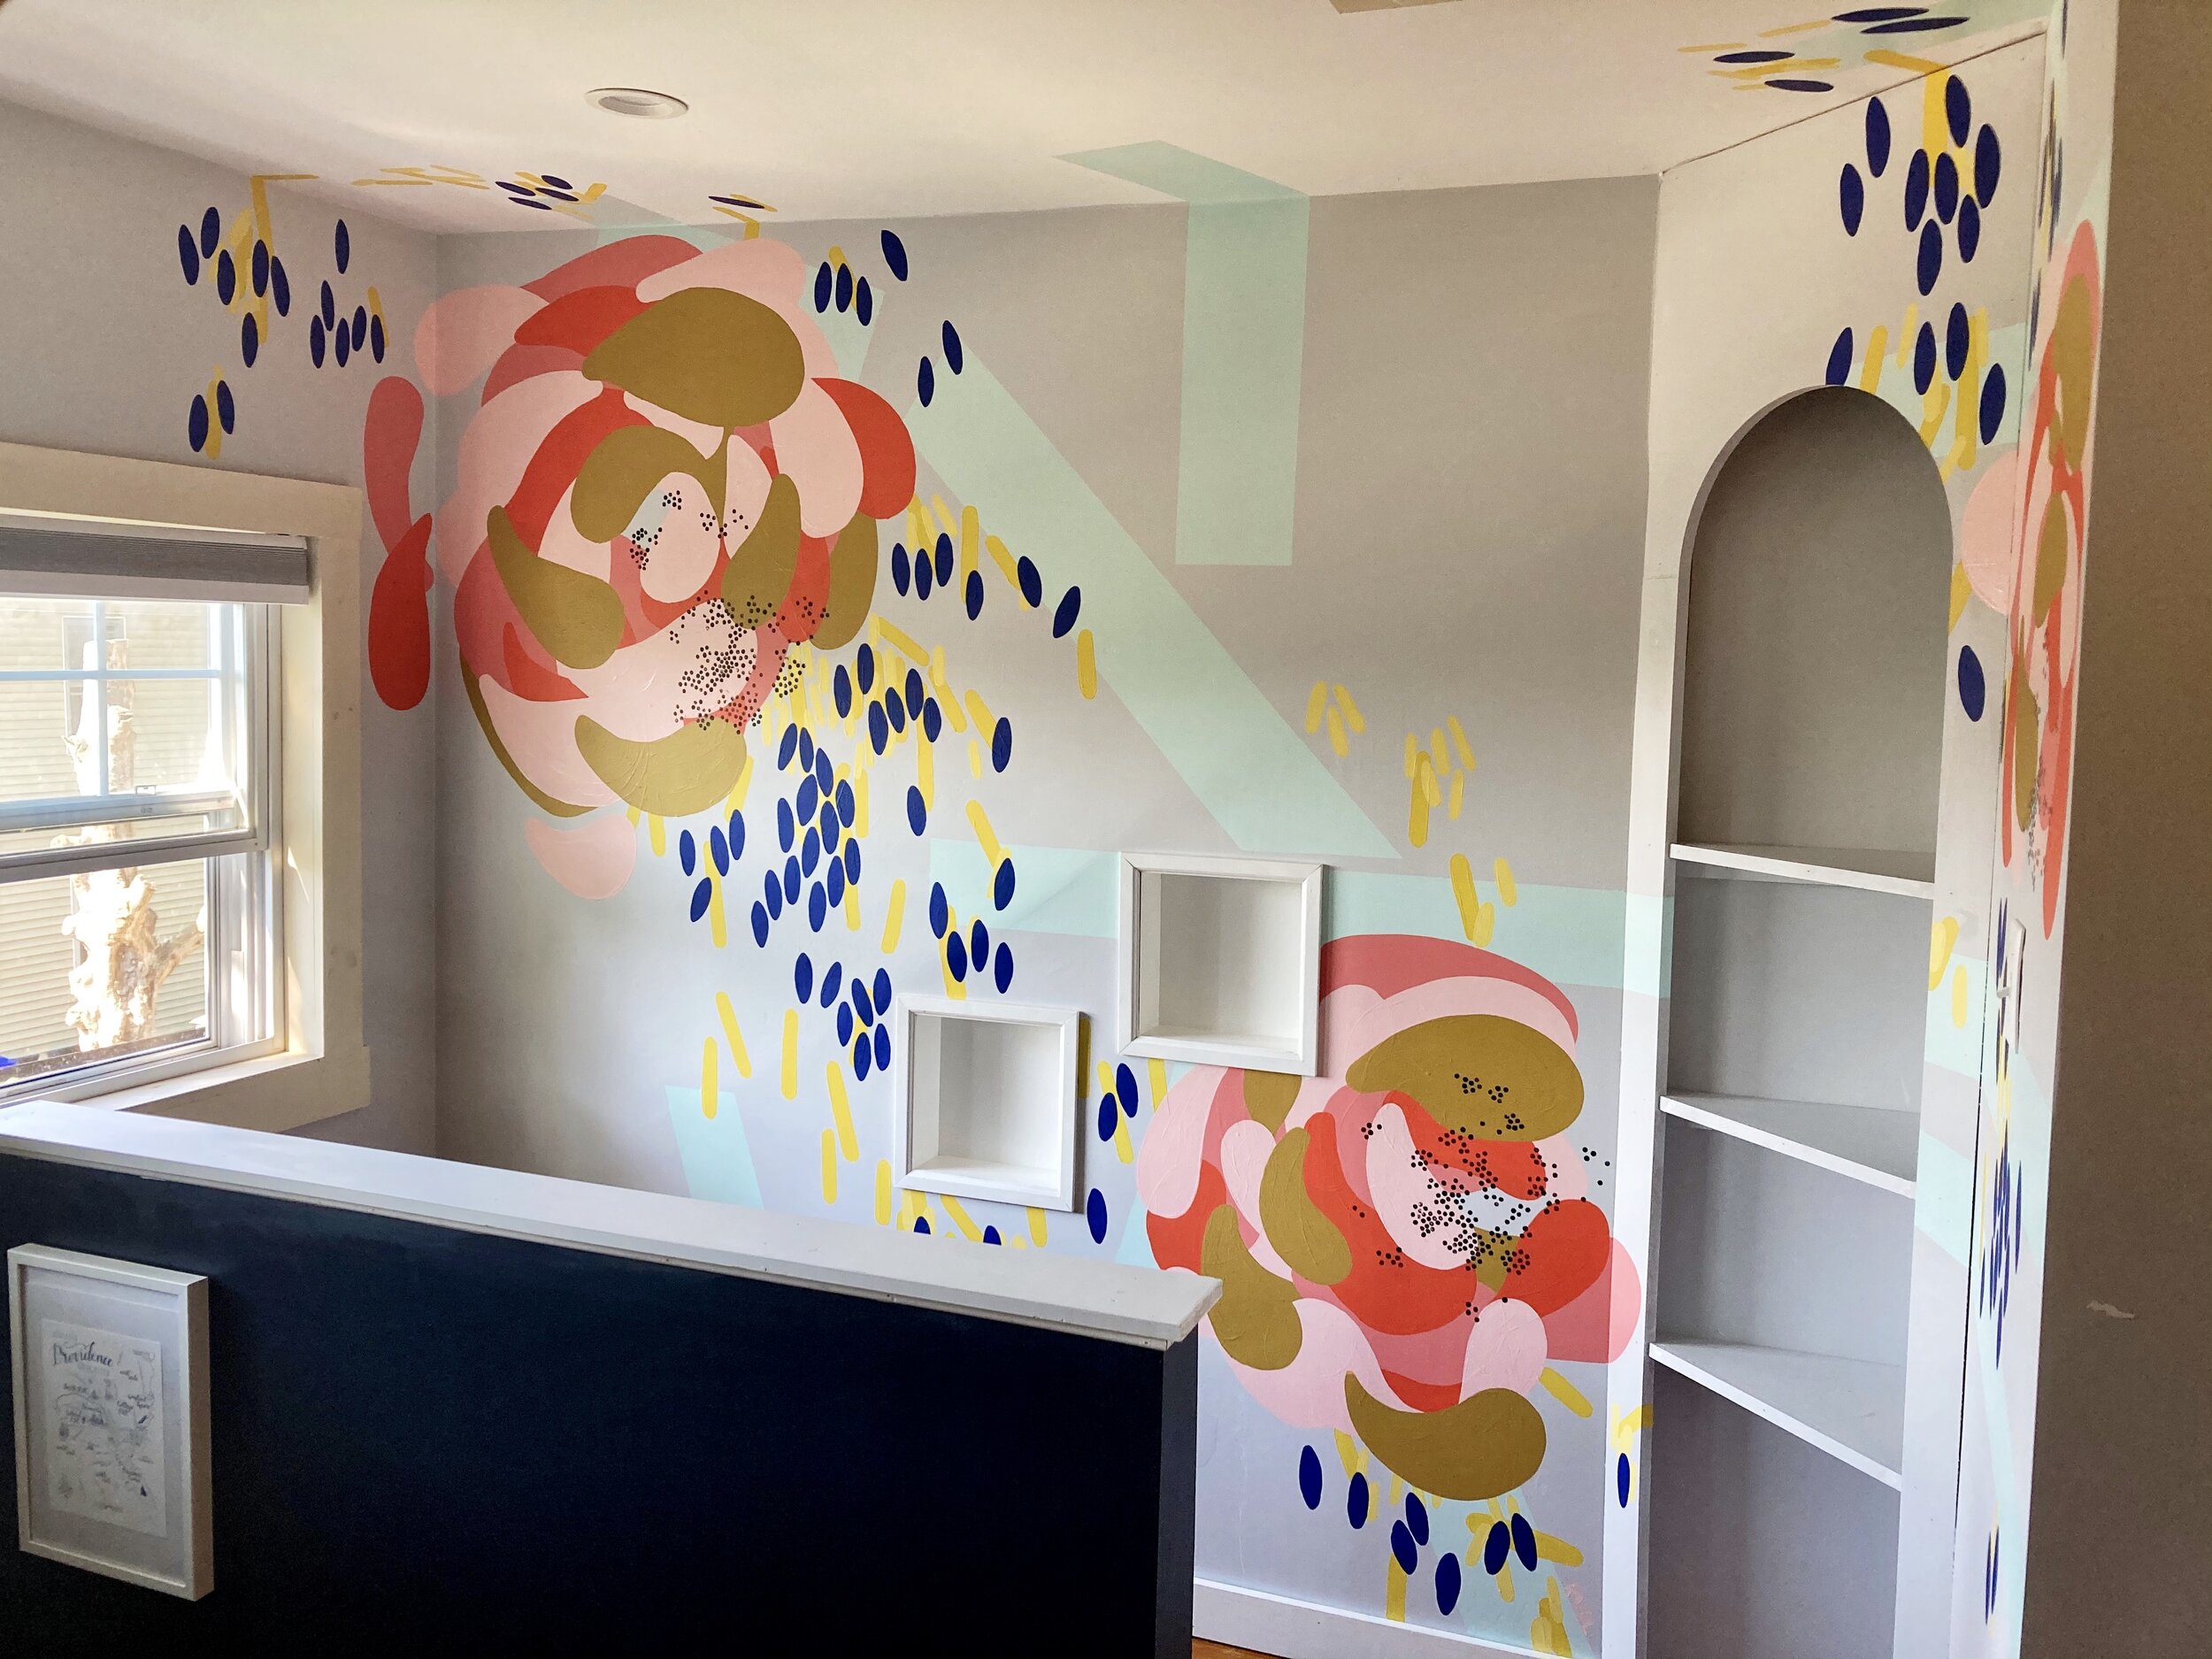  Abstract floral mural for a private client’s home renovation based in Providence, Rhode Island. This piece was designed and hand-painted in July 2020.     